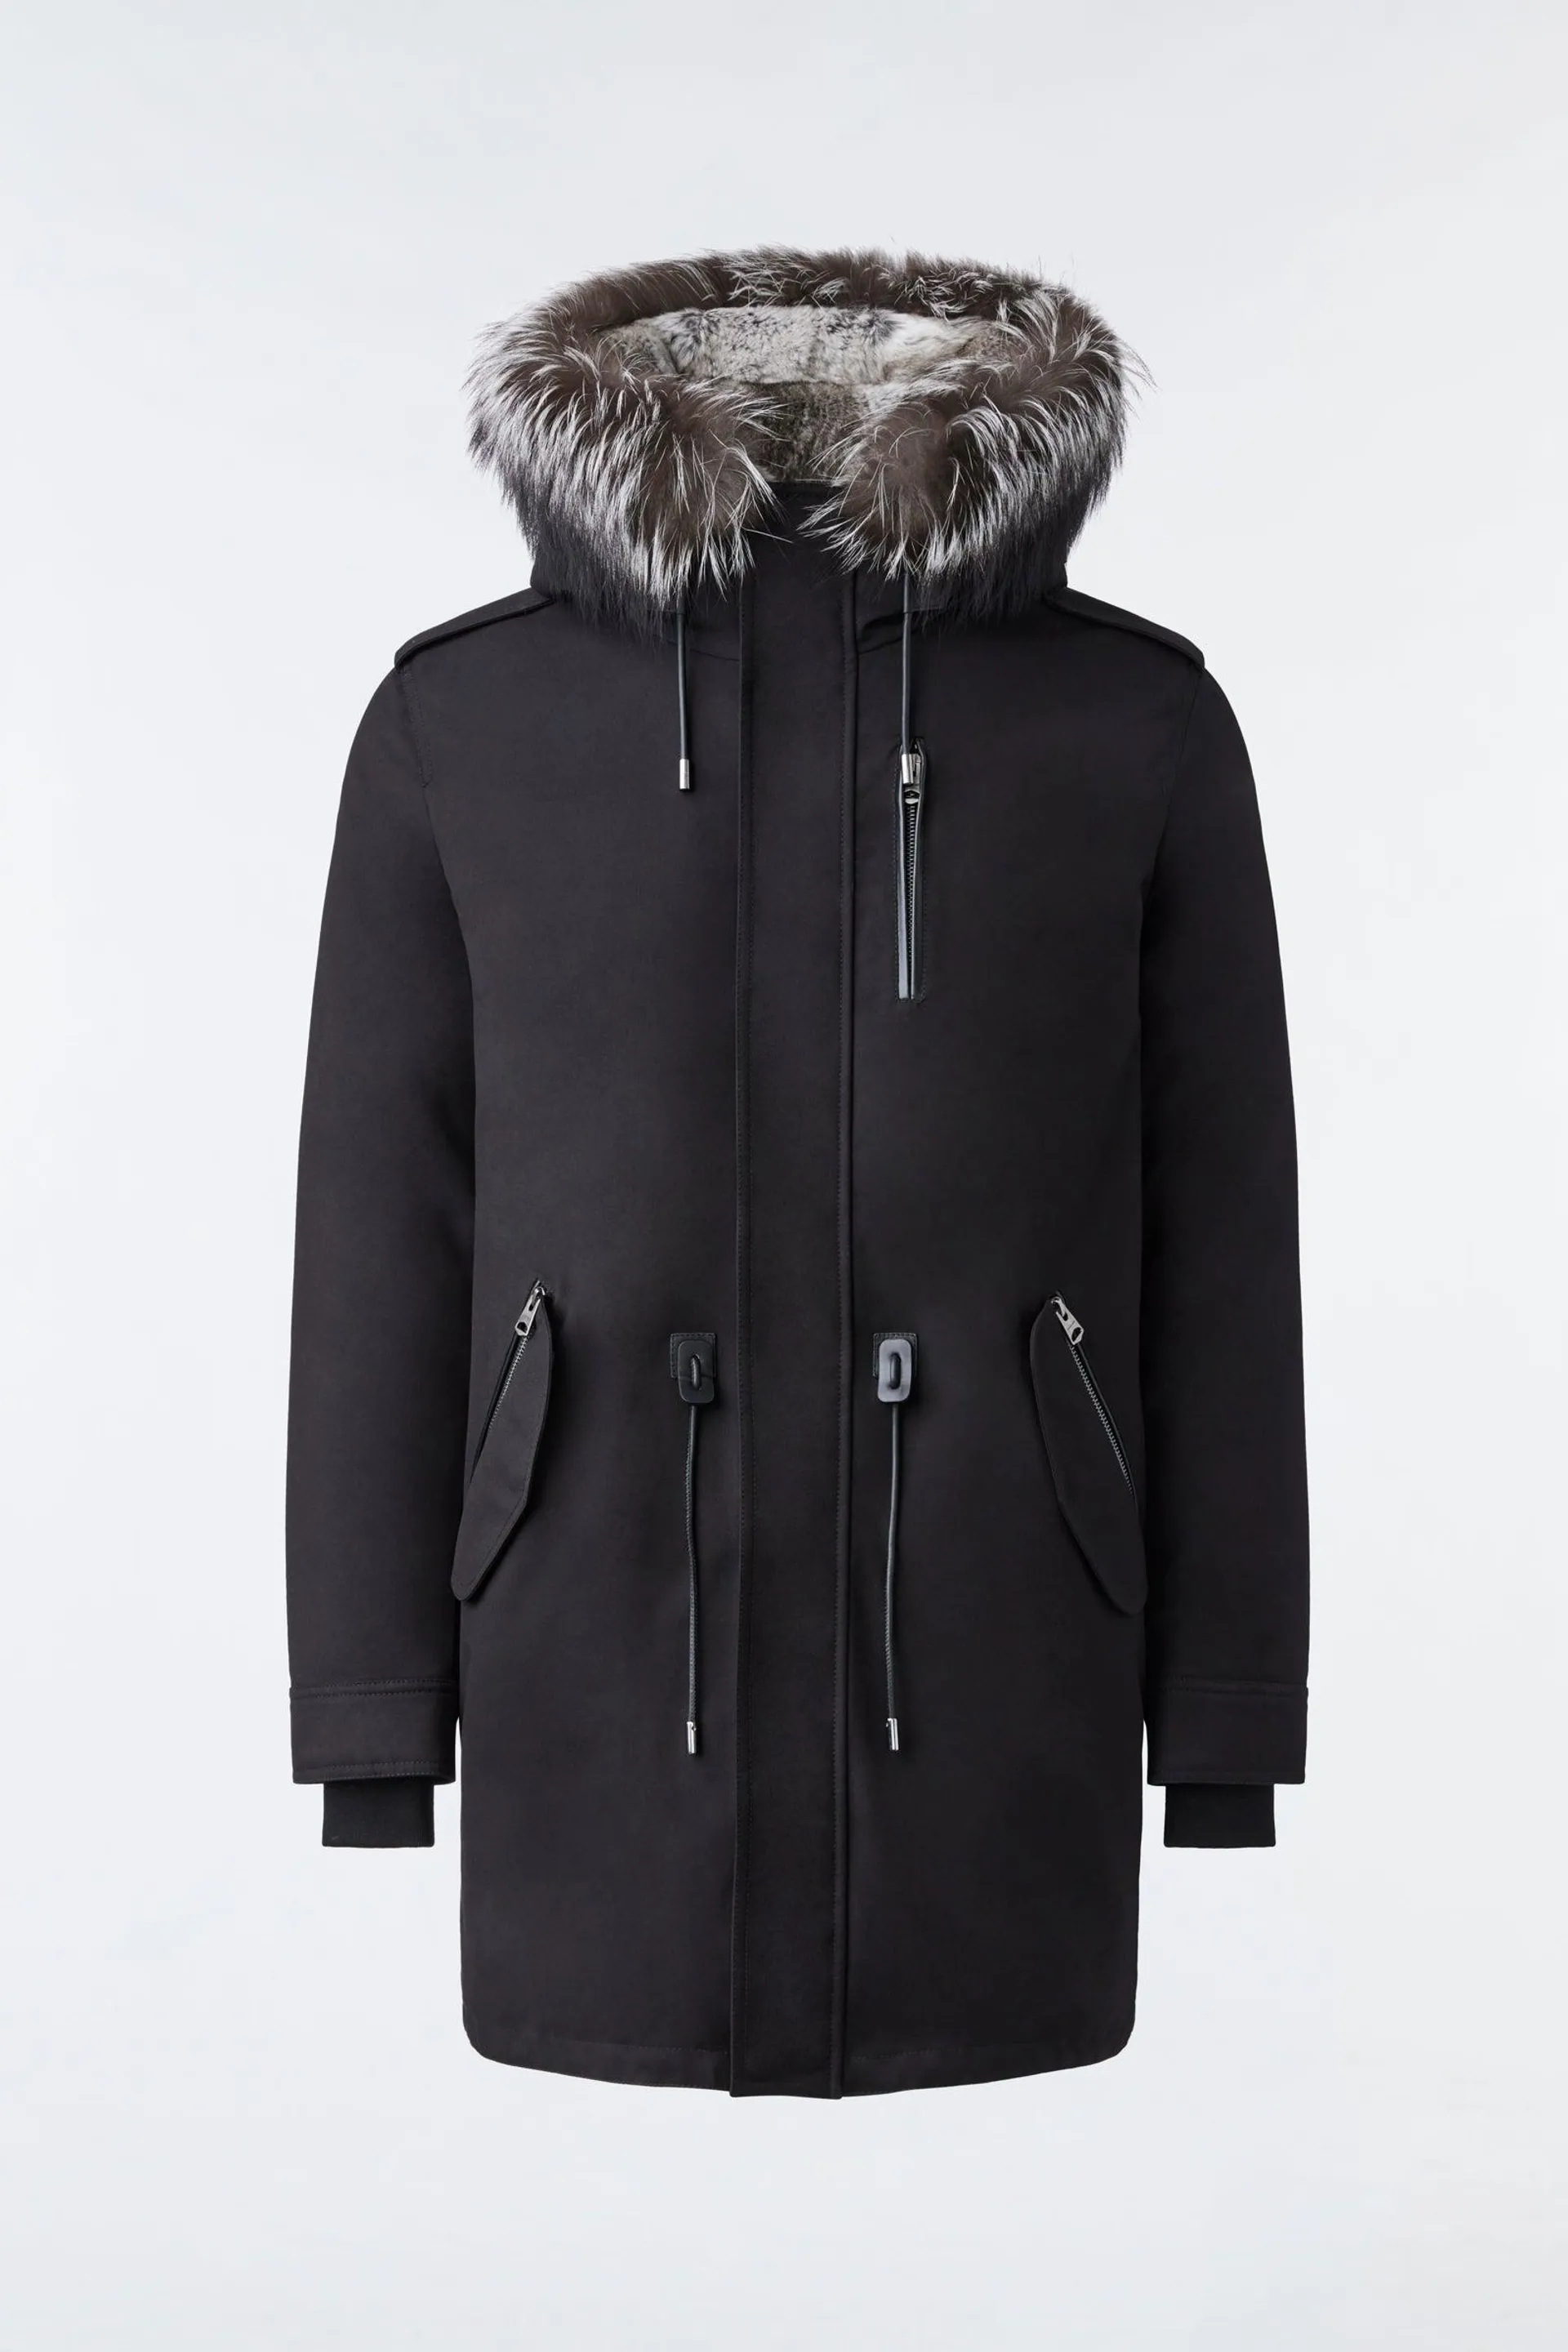 MORITZ rabbit fur-lined twill parka with removable silver fox fur trim